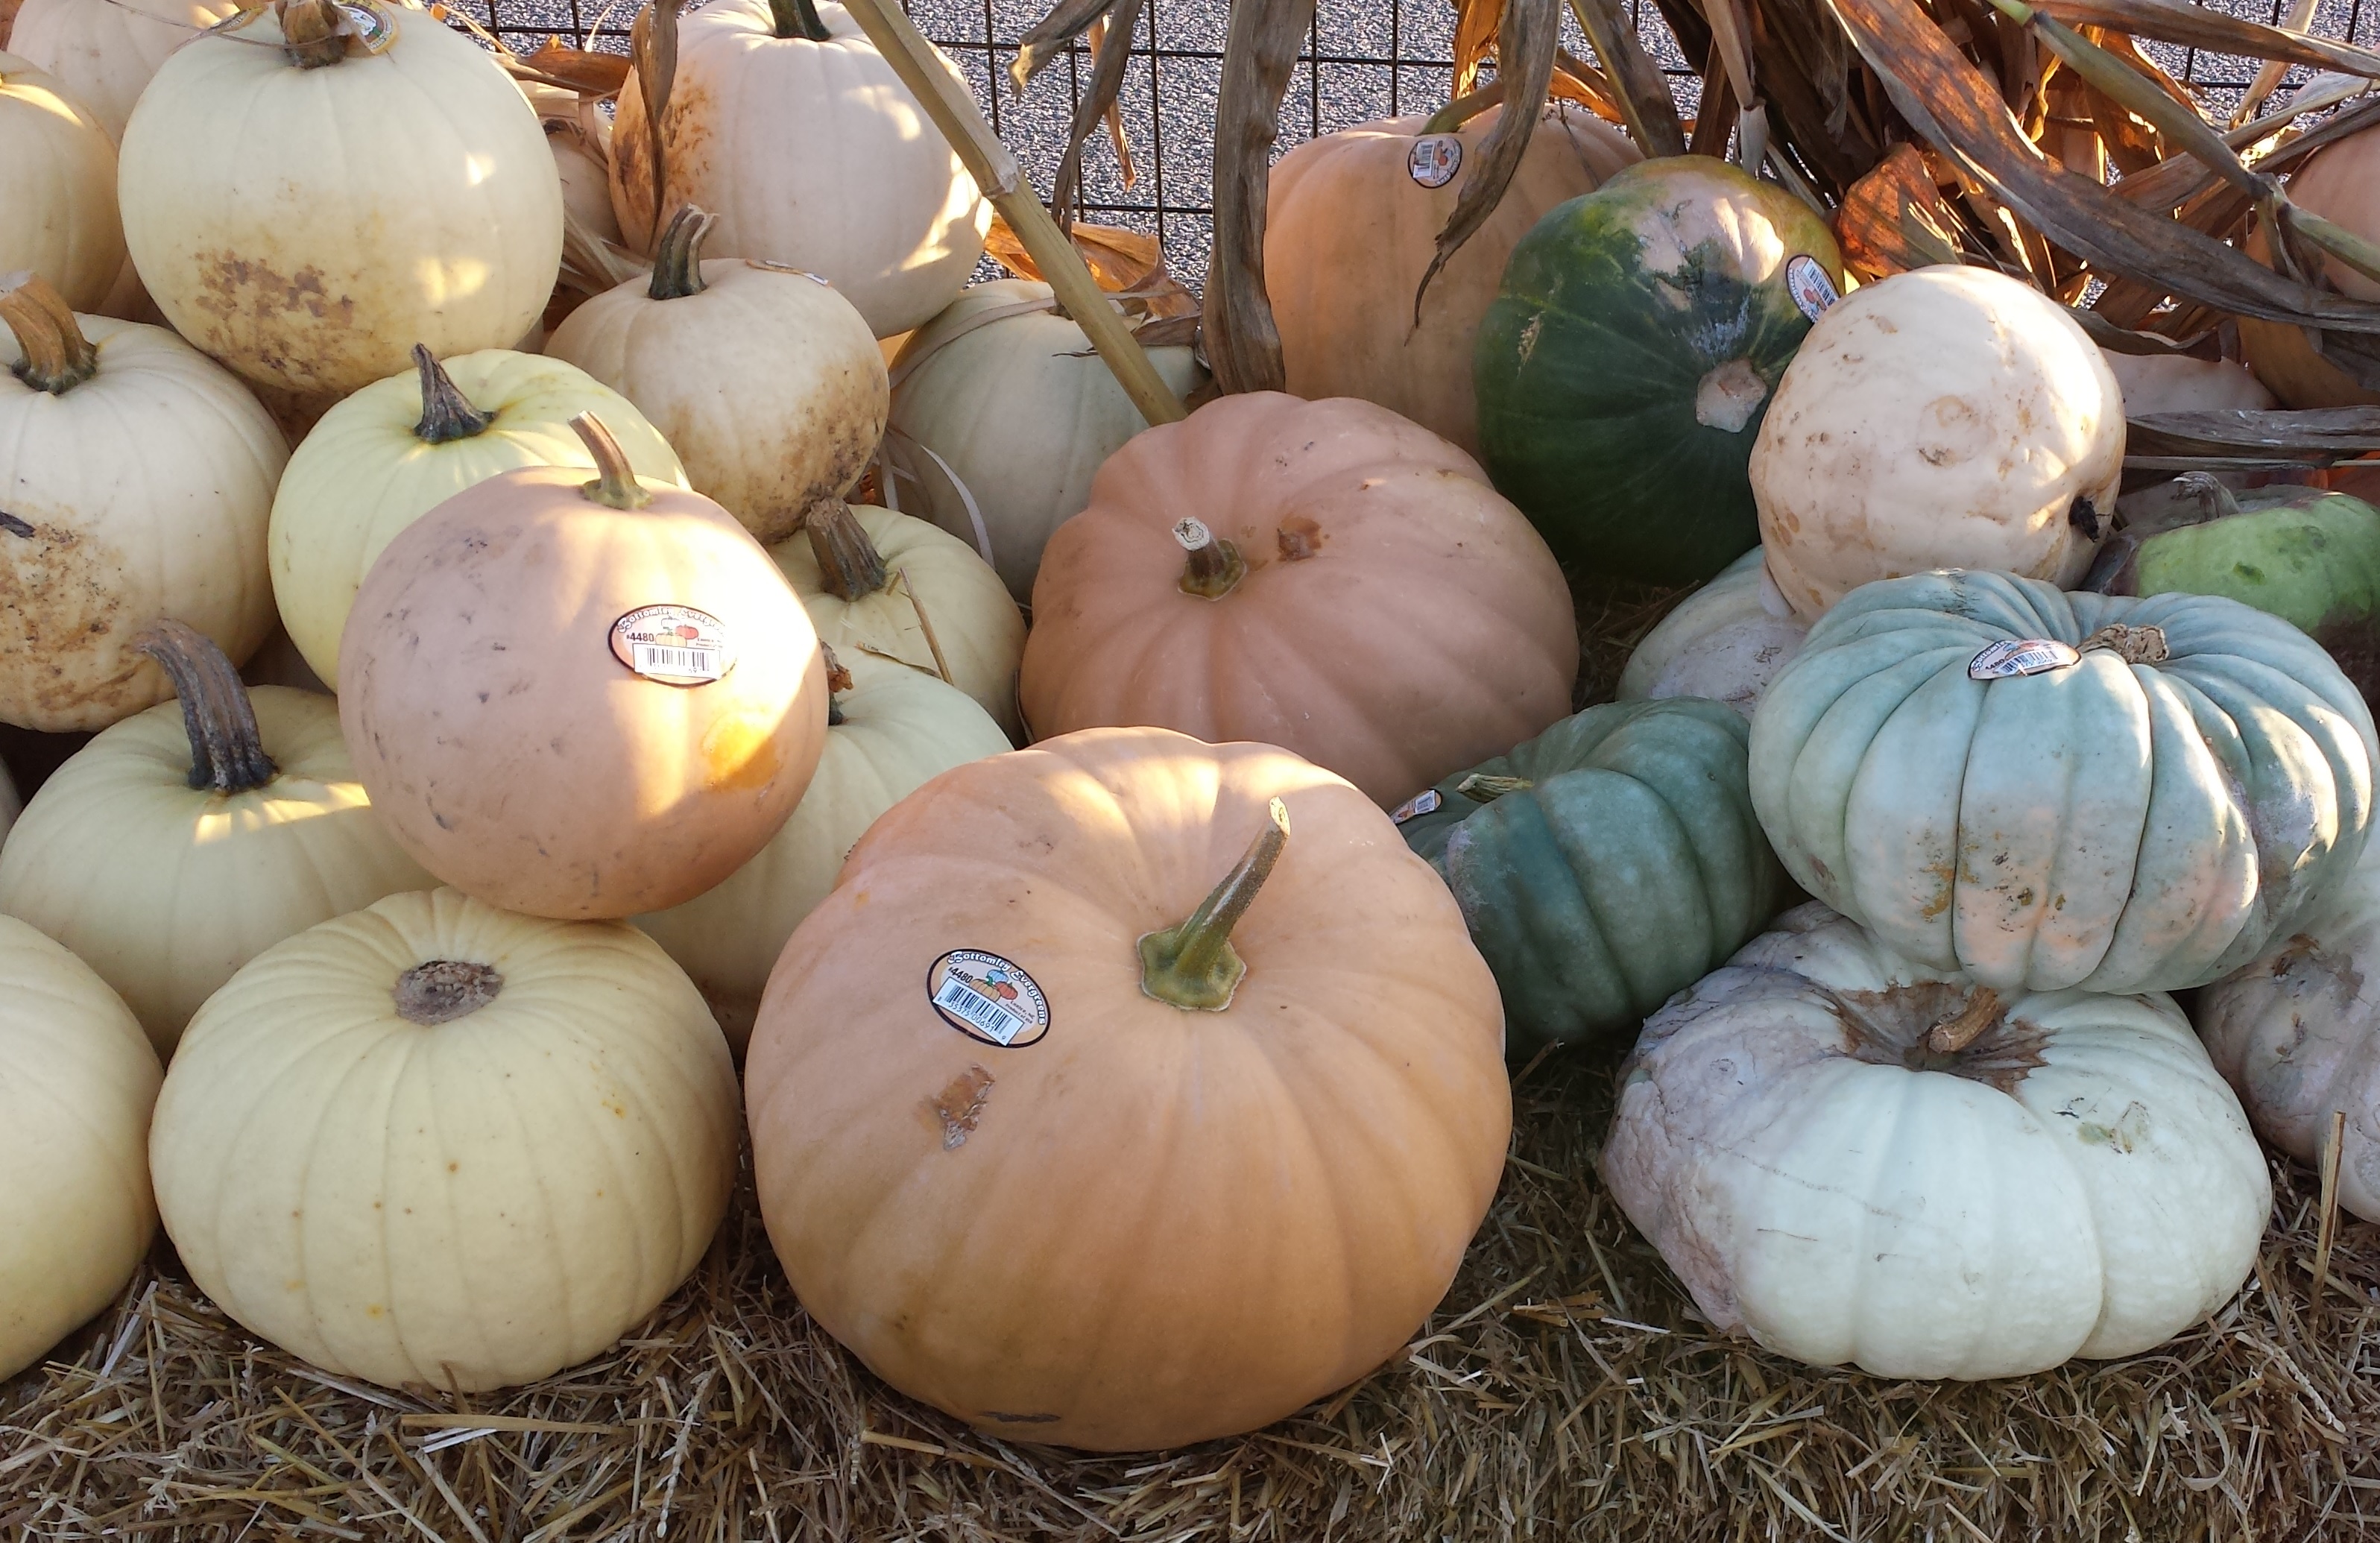 File:White Pumpkins and Squashes.jpg - Wikimedia Commons